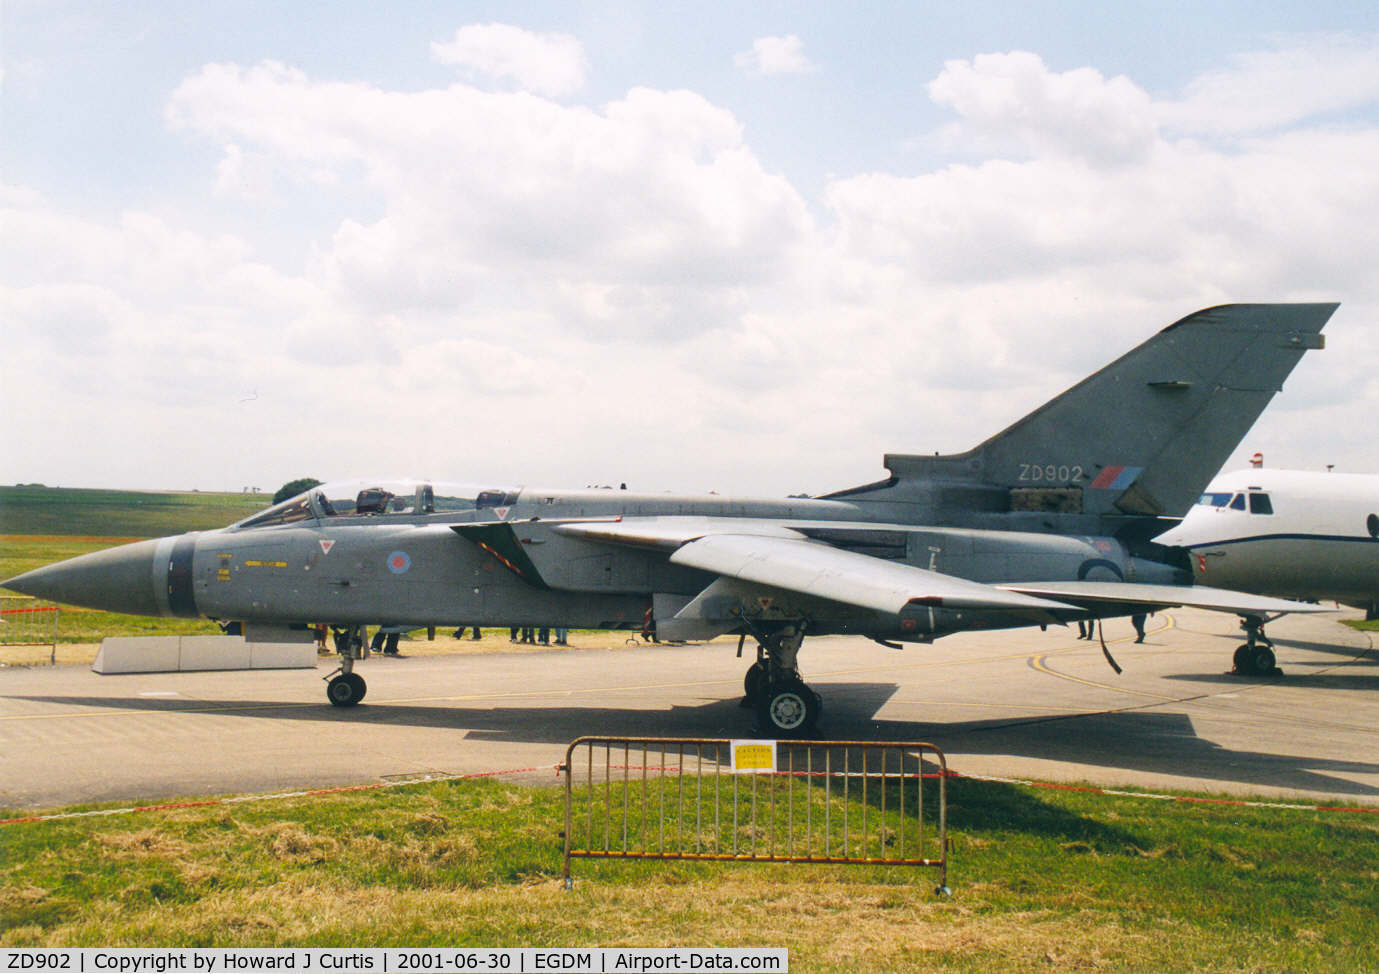 ZD902, 1984 Panavia Tornado F.2 C/N 367/AT004/3170, At the Open Day here.